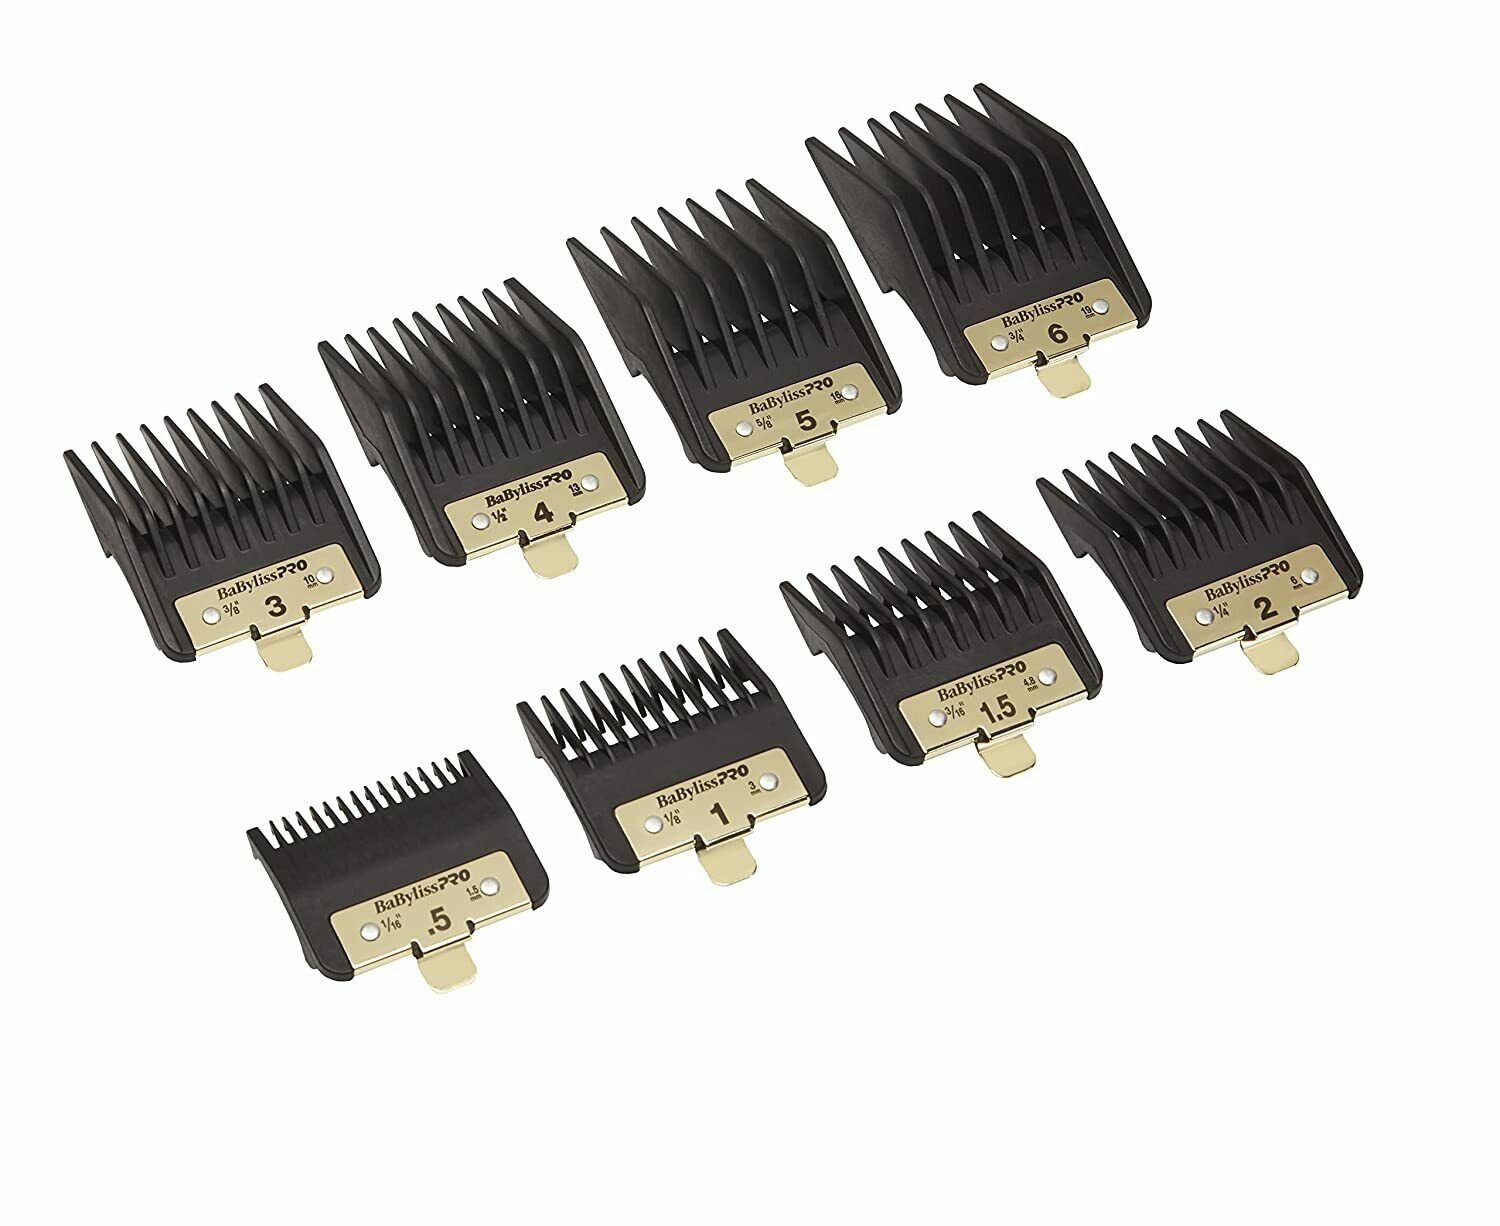 Set 8 size comb guards babyliss 4 barbers - Baybyliss premium clipper guards set 8 size - gold &amp; black color 074108446336